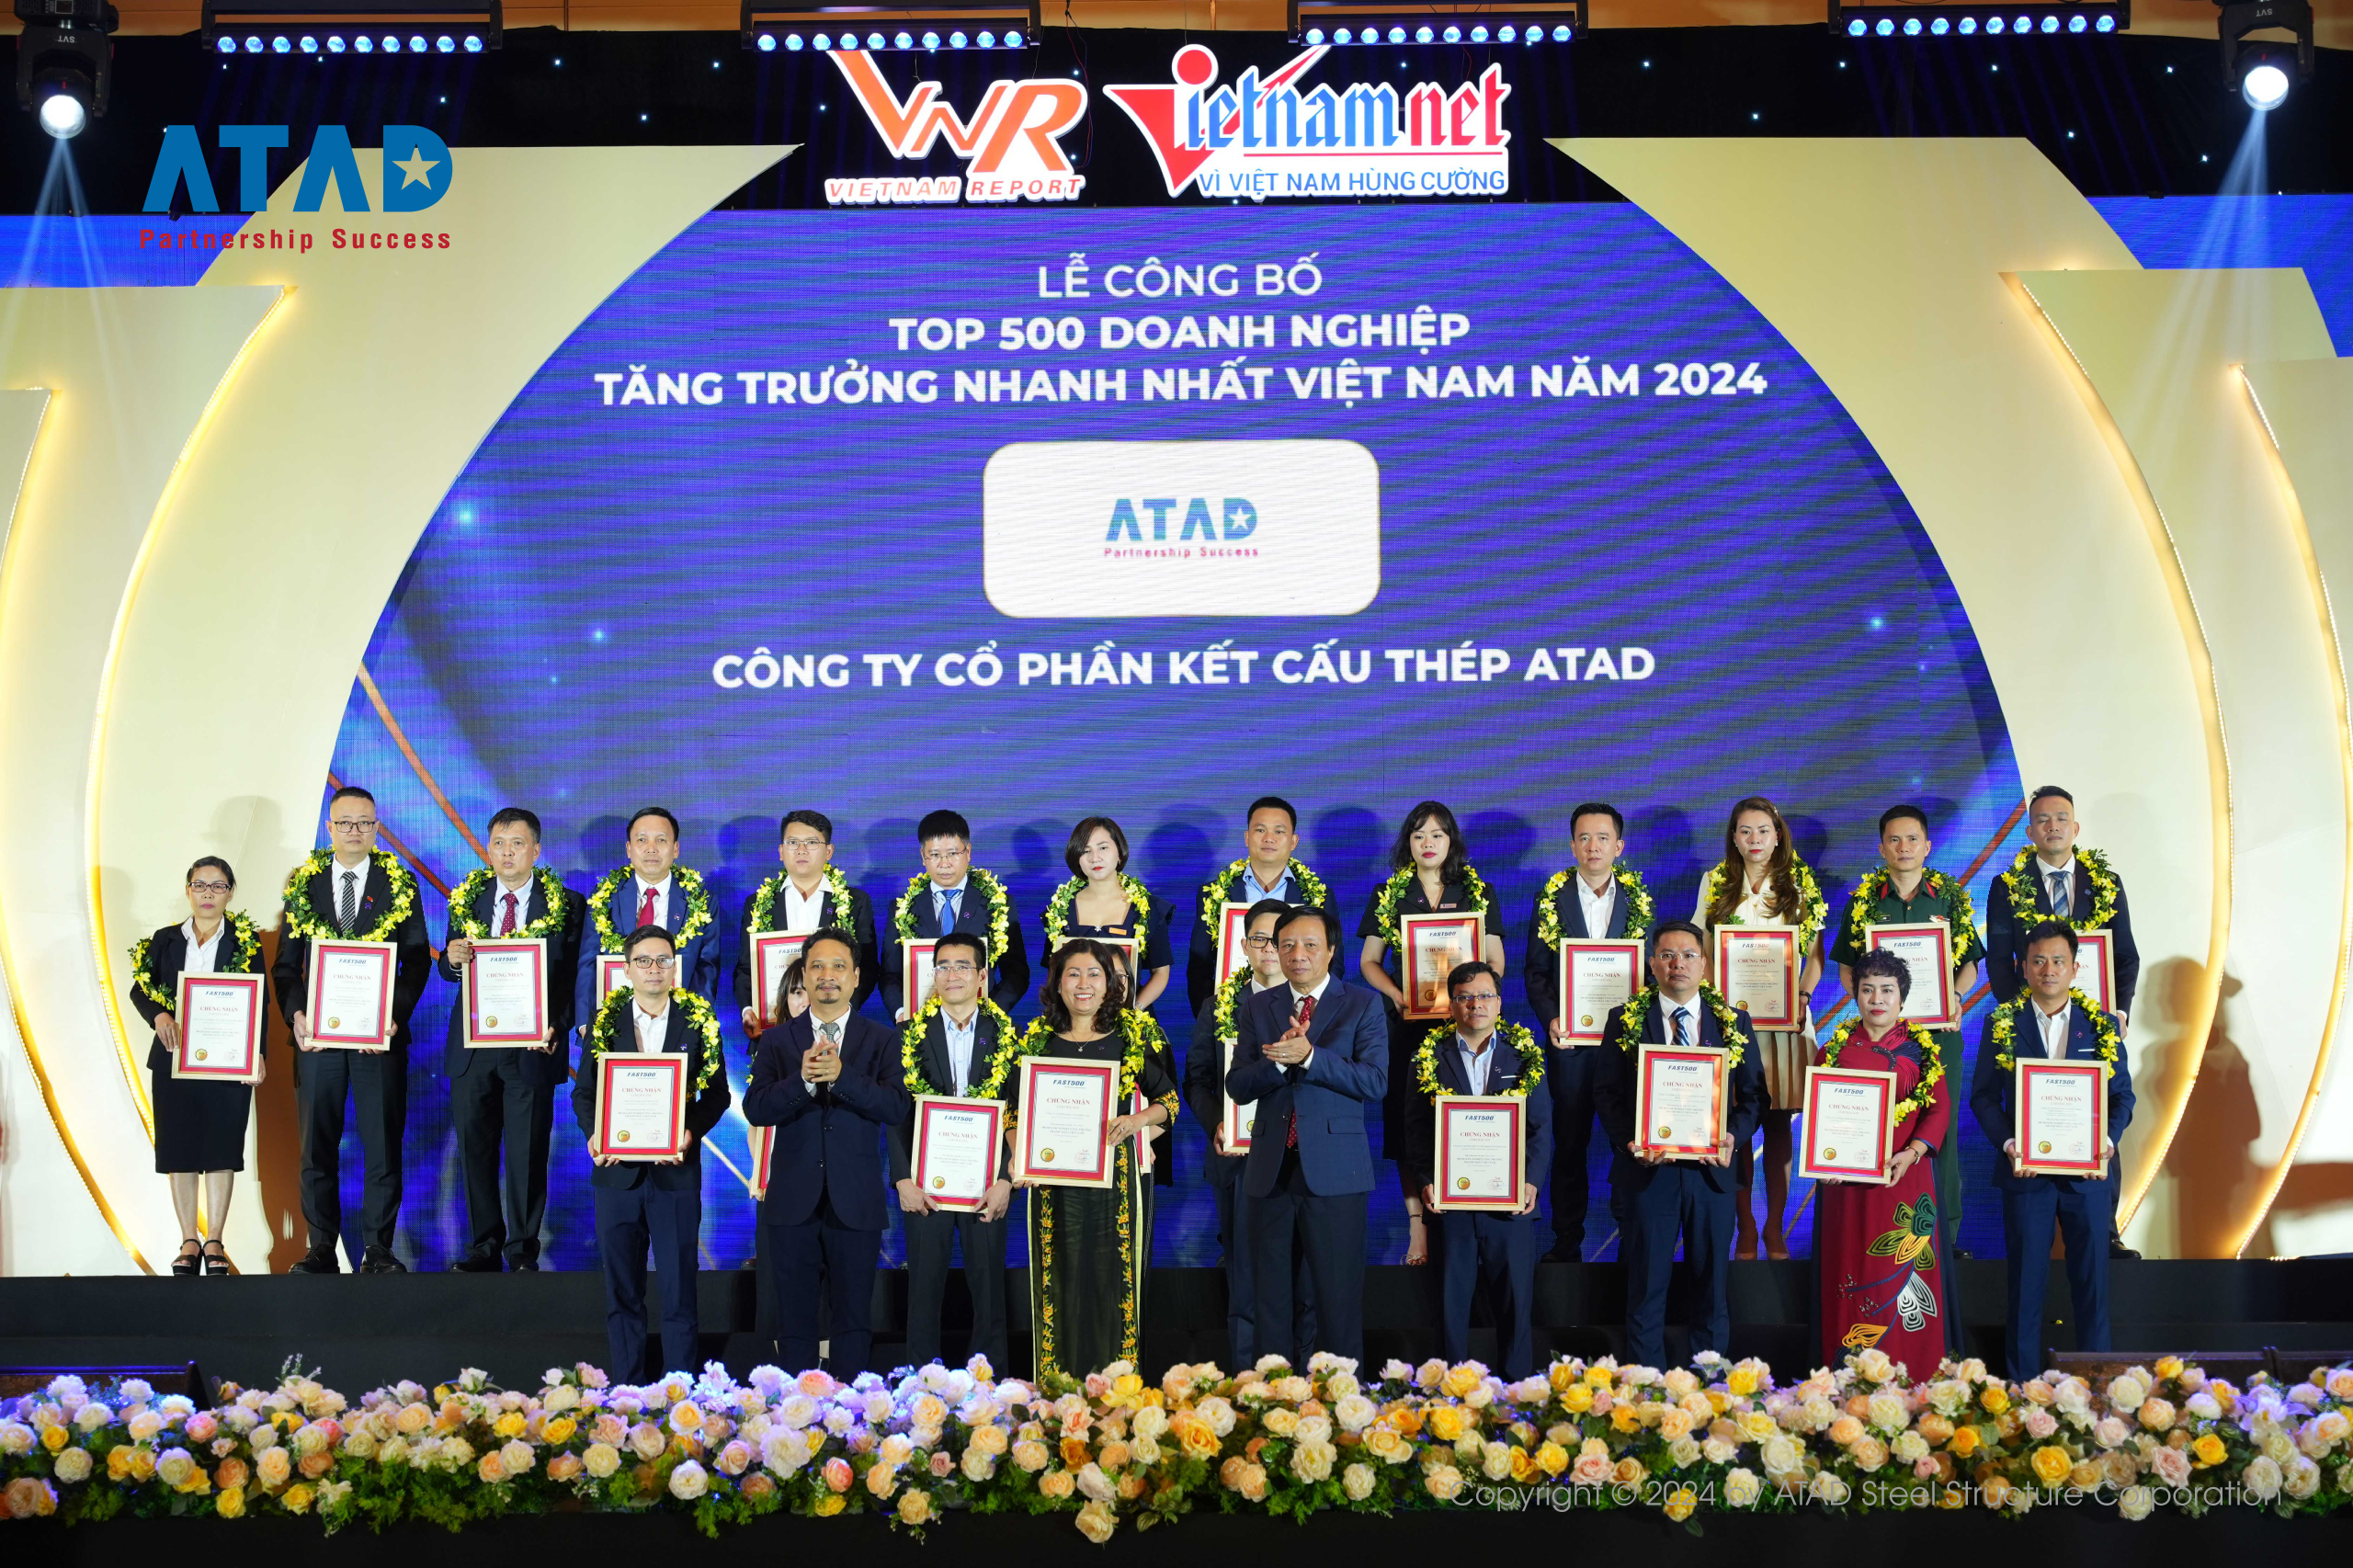 ATAD CONTINUES TO BE HONORED IN THE TOP LARGEST ENTERPRISES IN VIETNAM 2024